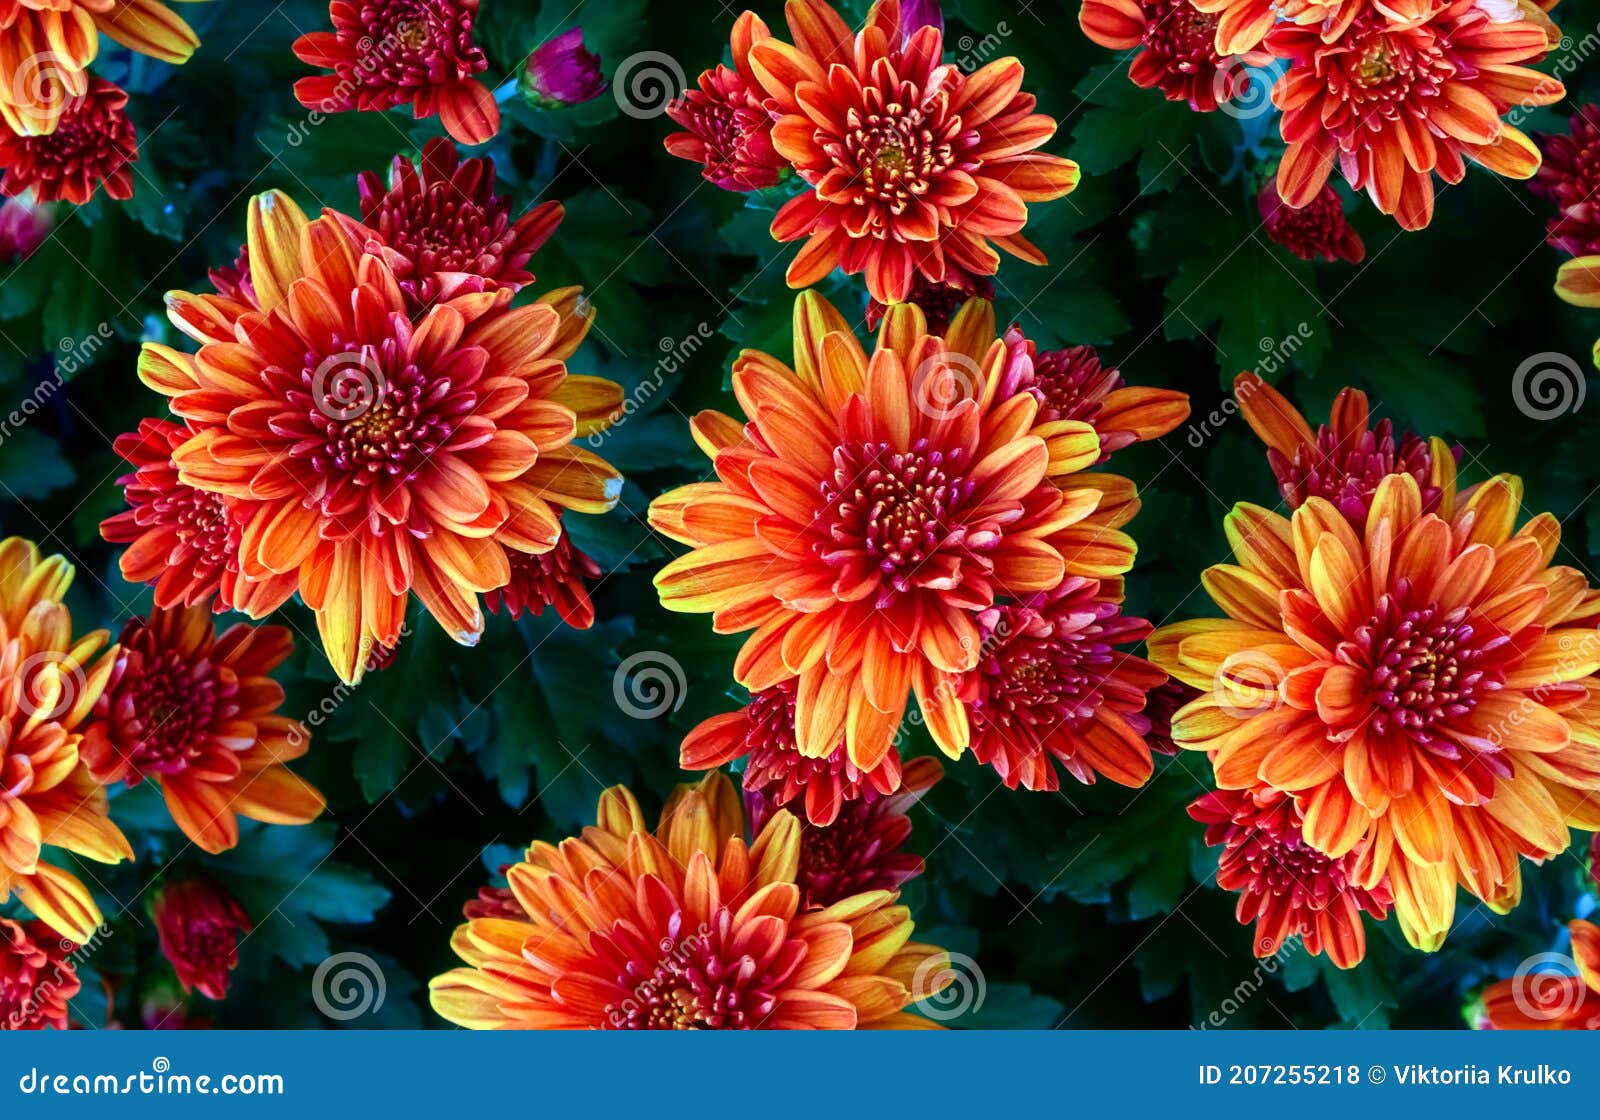 Natural Background with Autumn Flowers, Wallpaper of Orange Chrysanthemums  Stock Photo - Image of bunch, chrysanthemums: 207255218